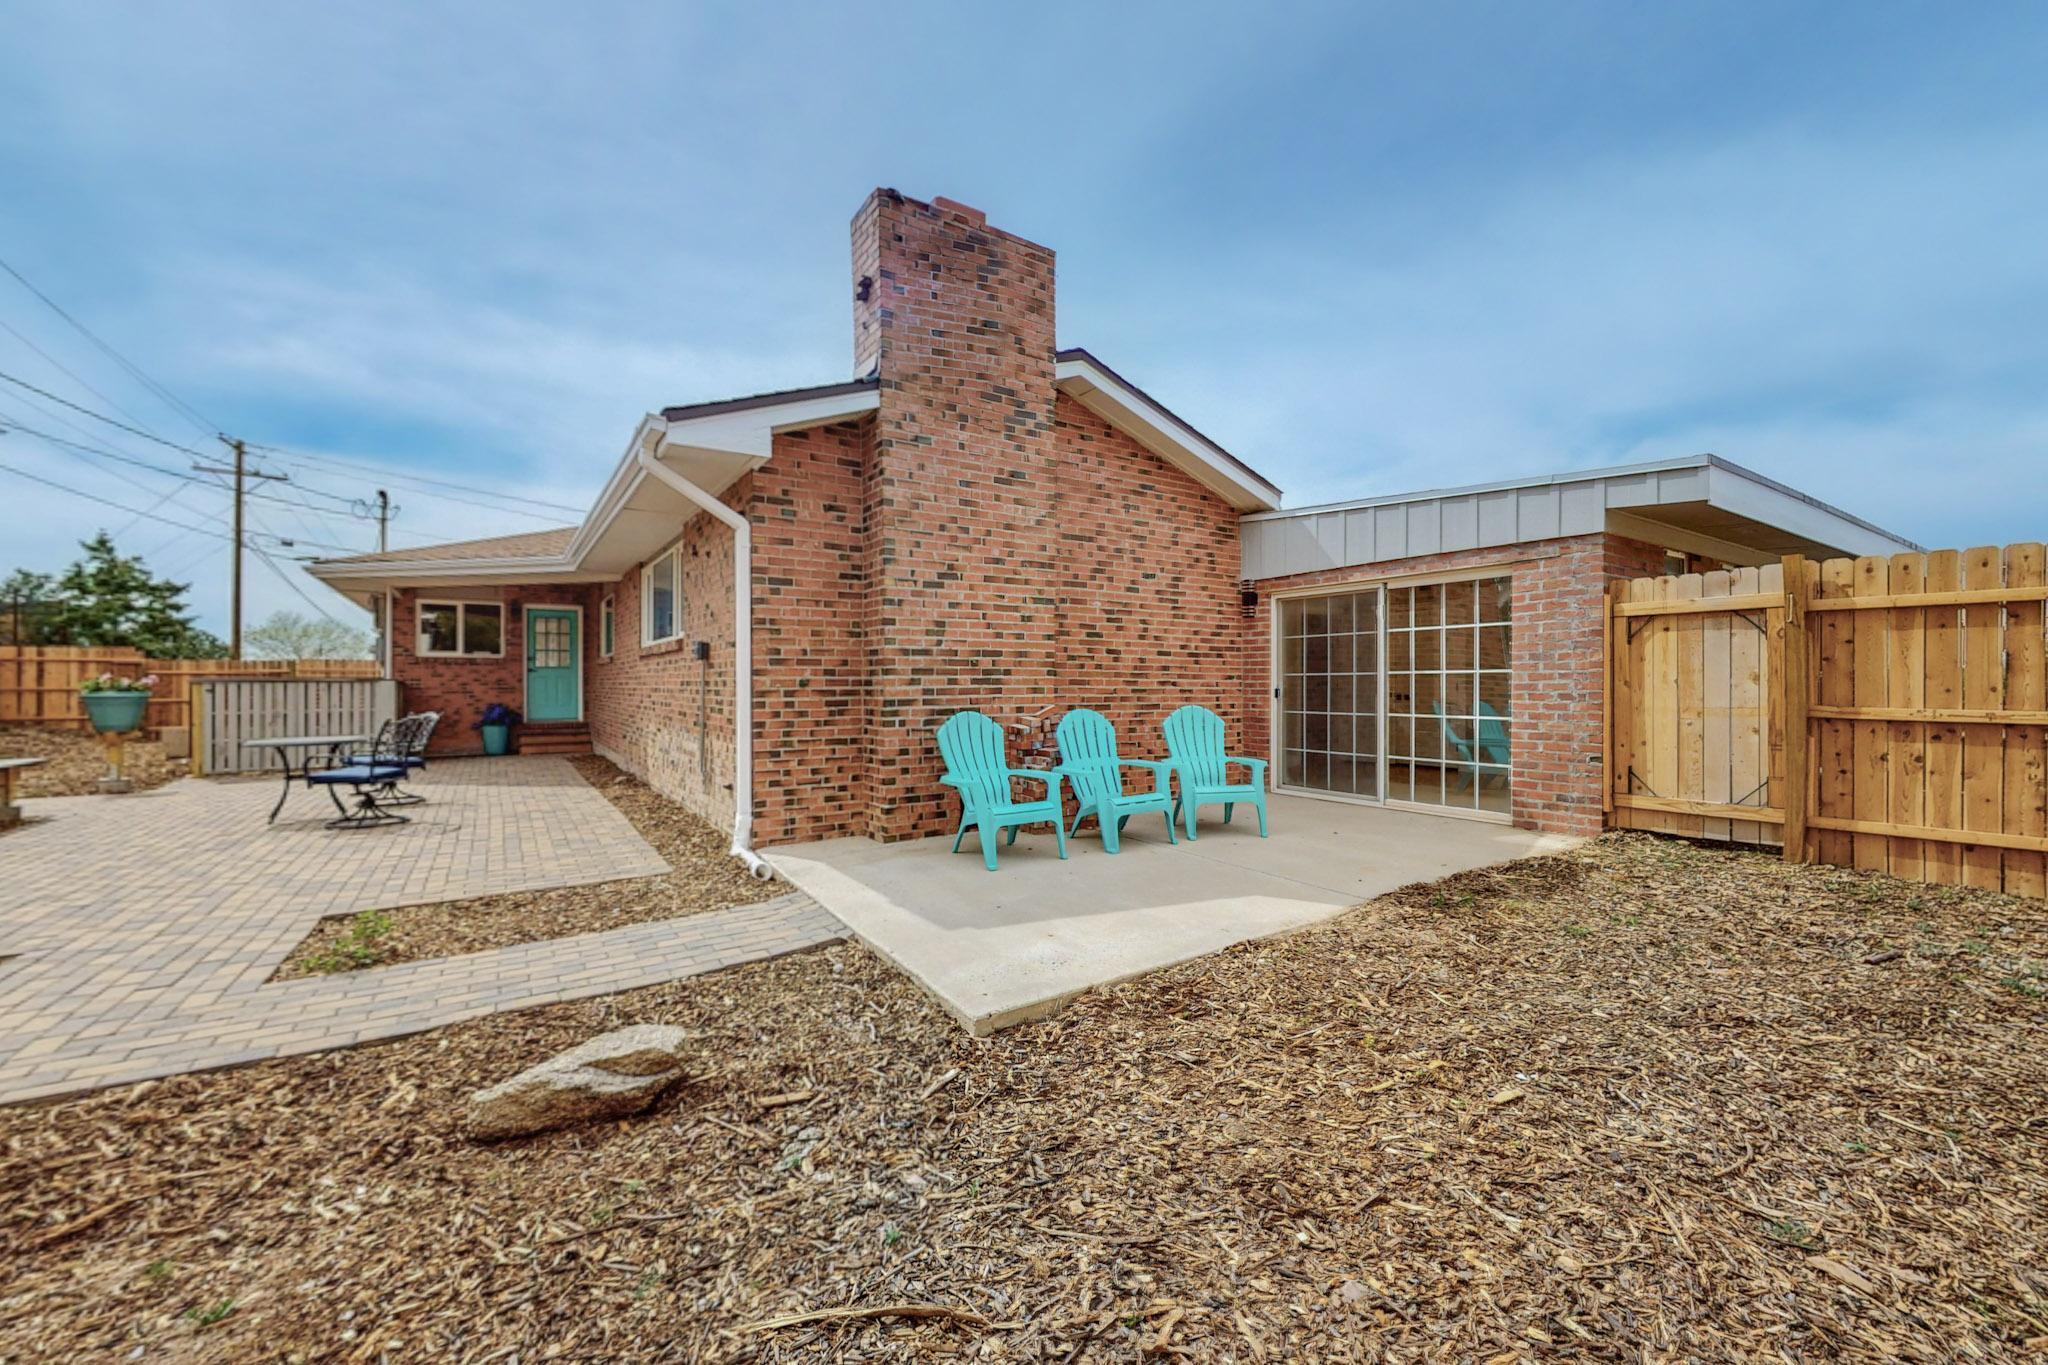 806 Four Hills Road SE, Albuquerque, New Mexico 87123, 3 Bedrooms Bedrooms, ,4 BathroomsBathrooms,Residential,For Sale,806 Four Hills Road SE,1061390